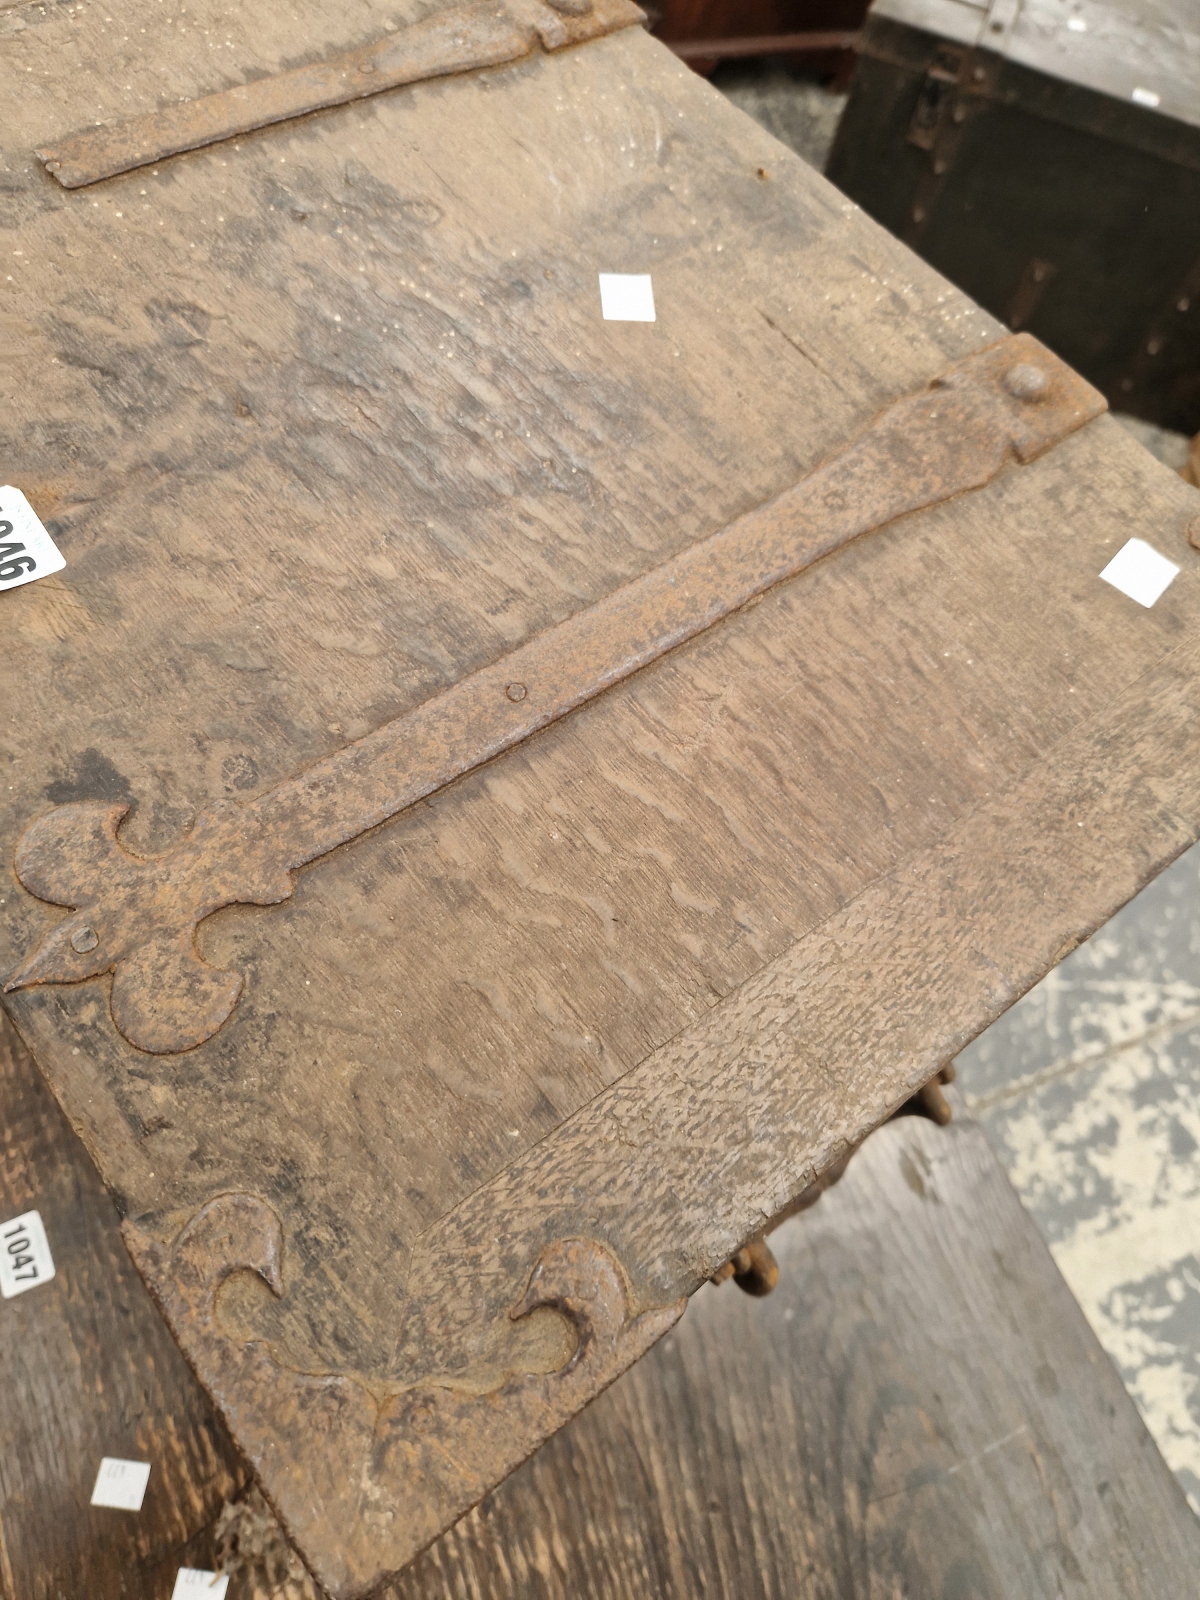 AN IRON BOUND TWO HANDLED OAK STRONG BOX BEARING THE DATE 1689 INSIDE THE HINGED LID - Image 3 of 7